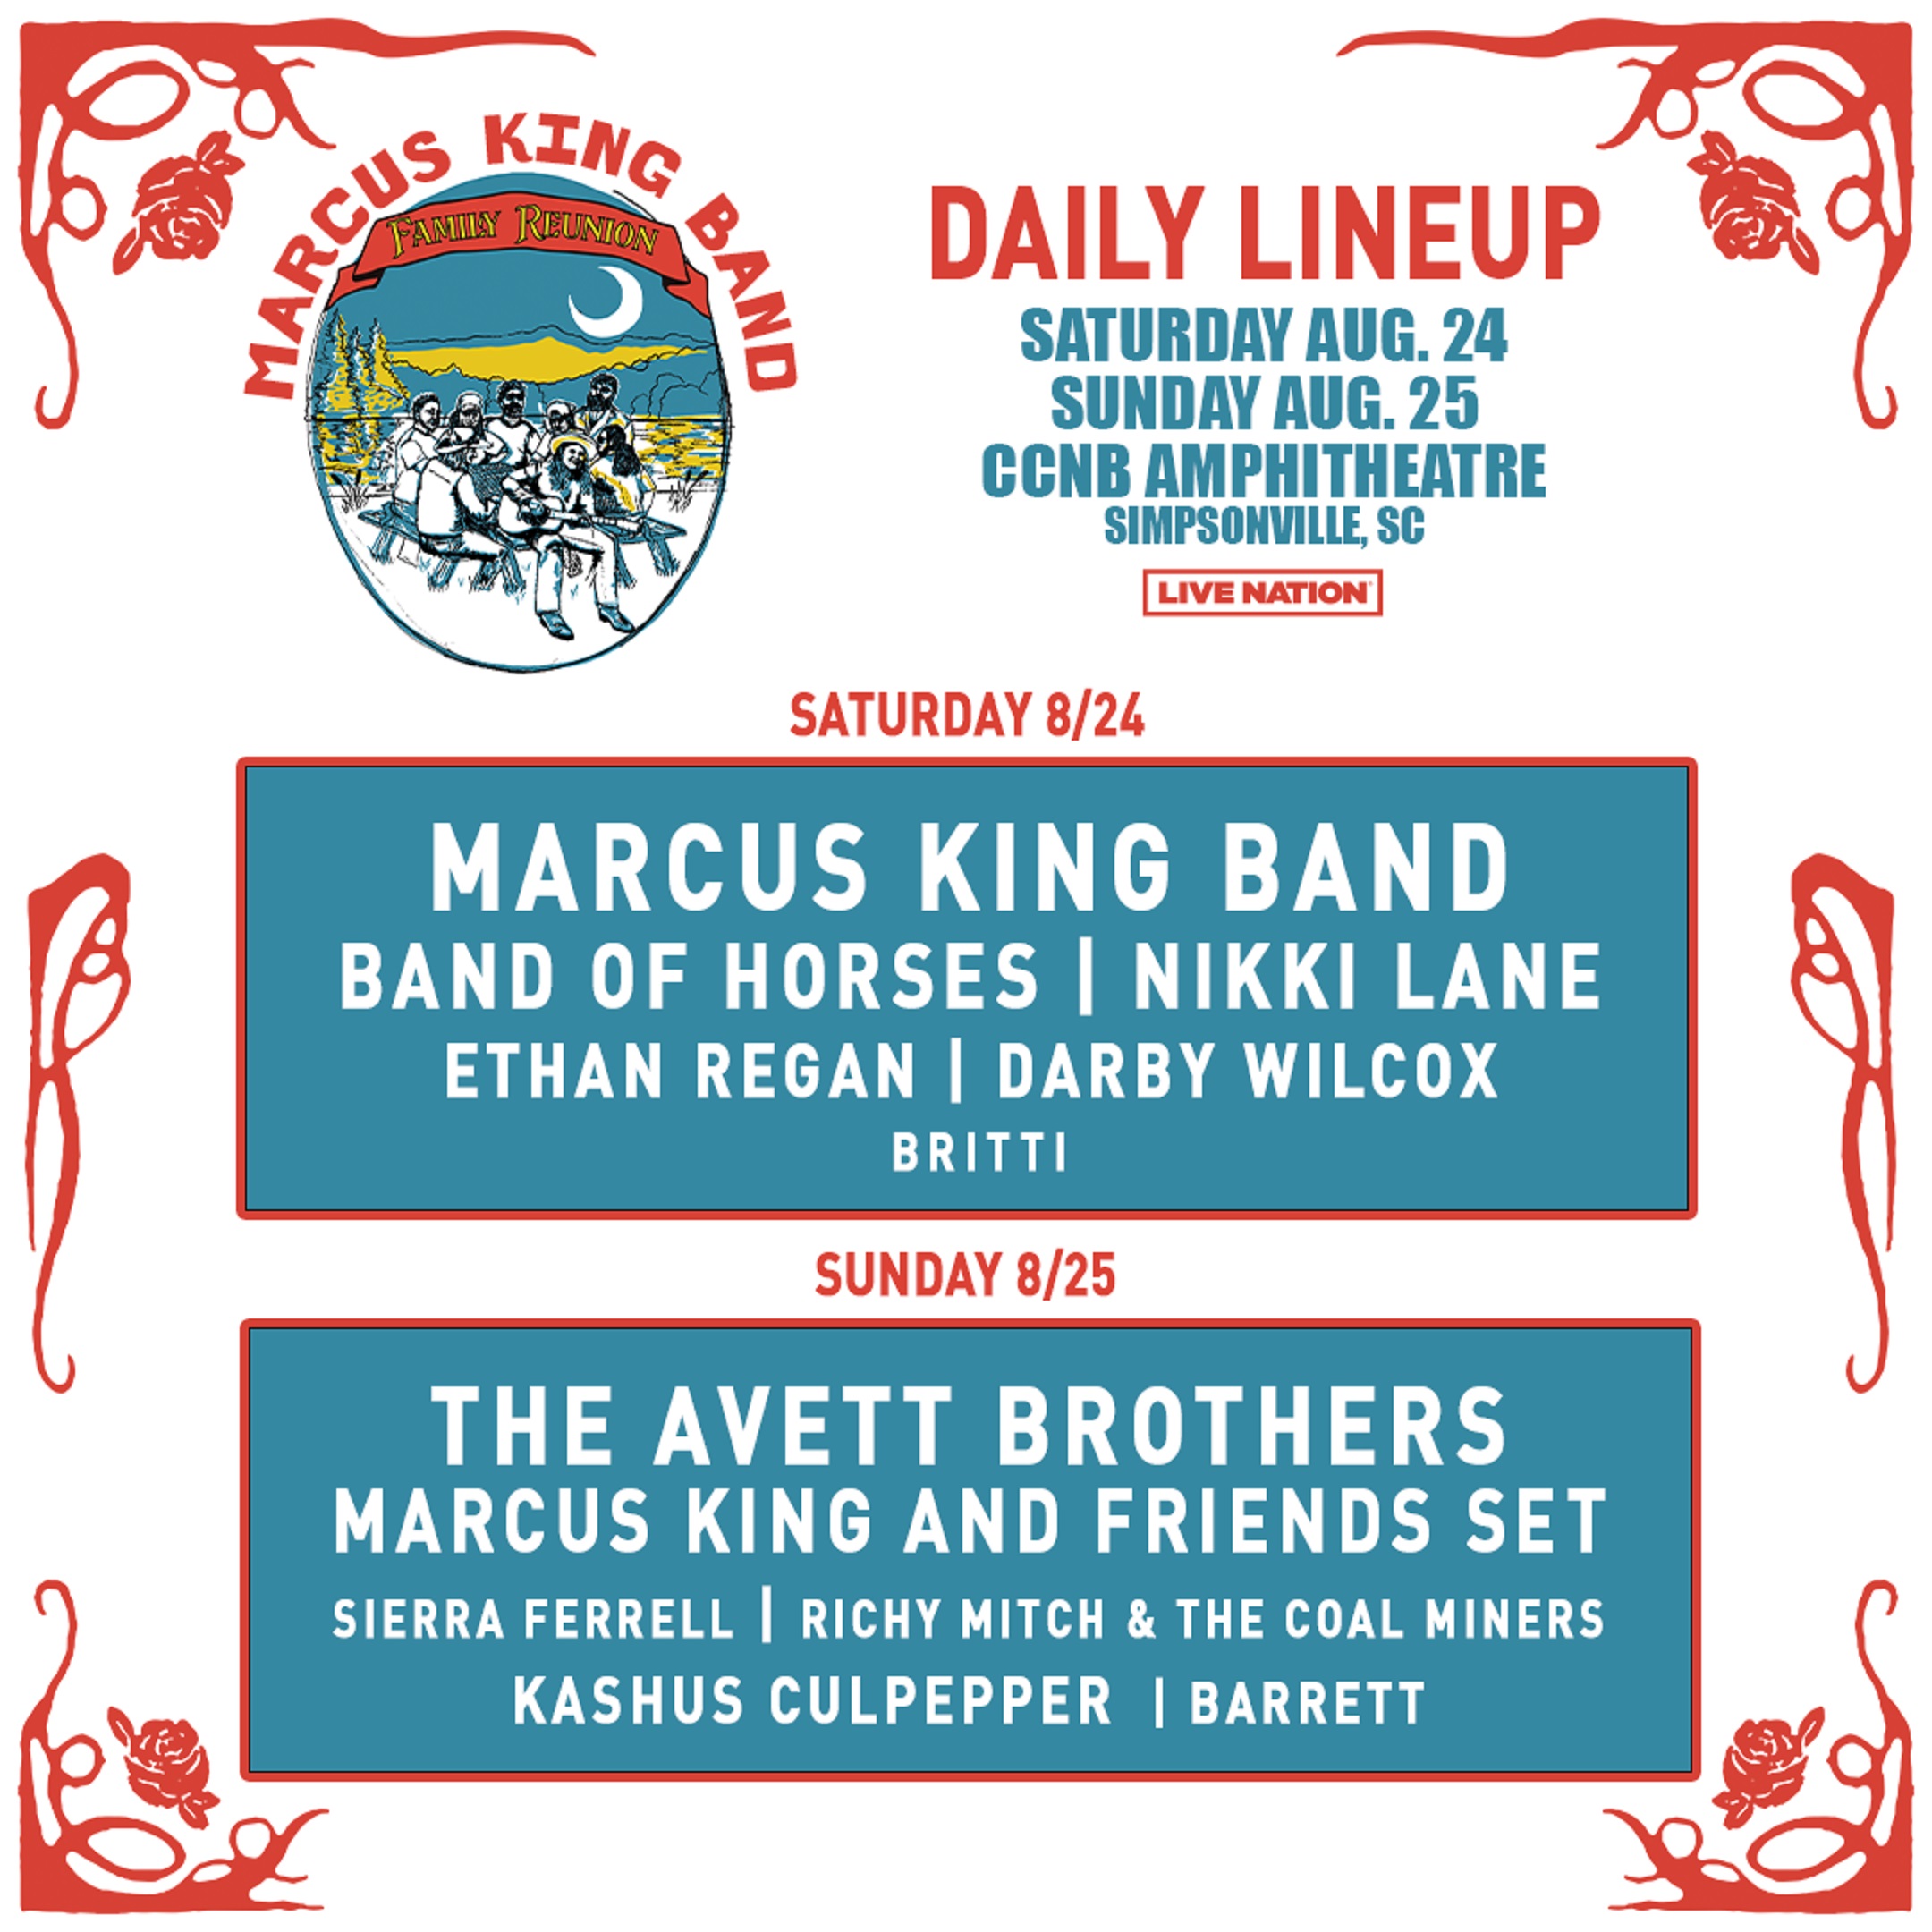 Marcus King Band Family Reunion reveals festival lineup by day